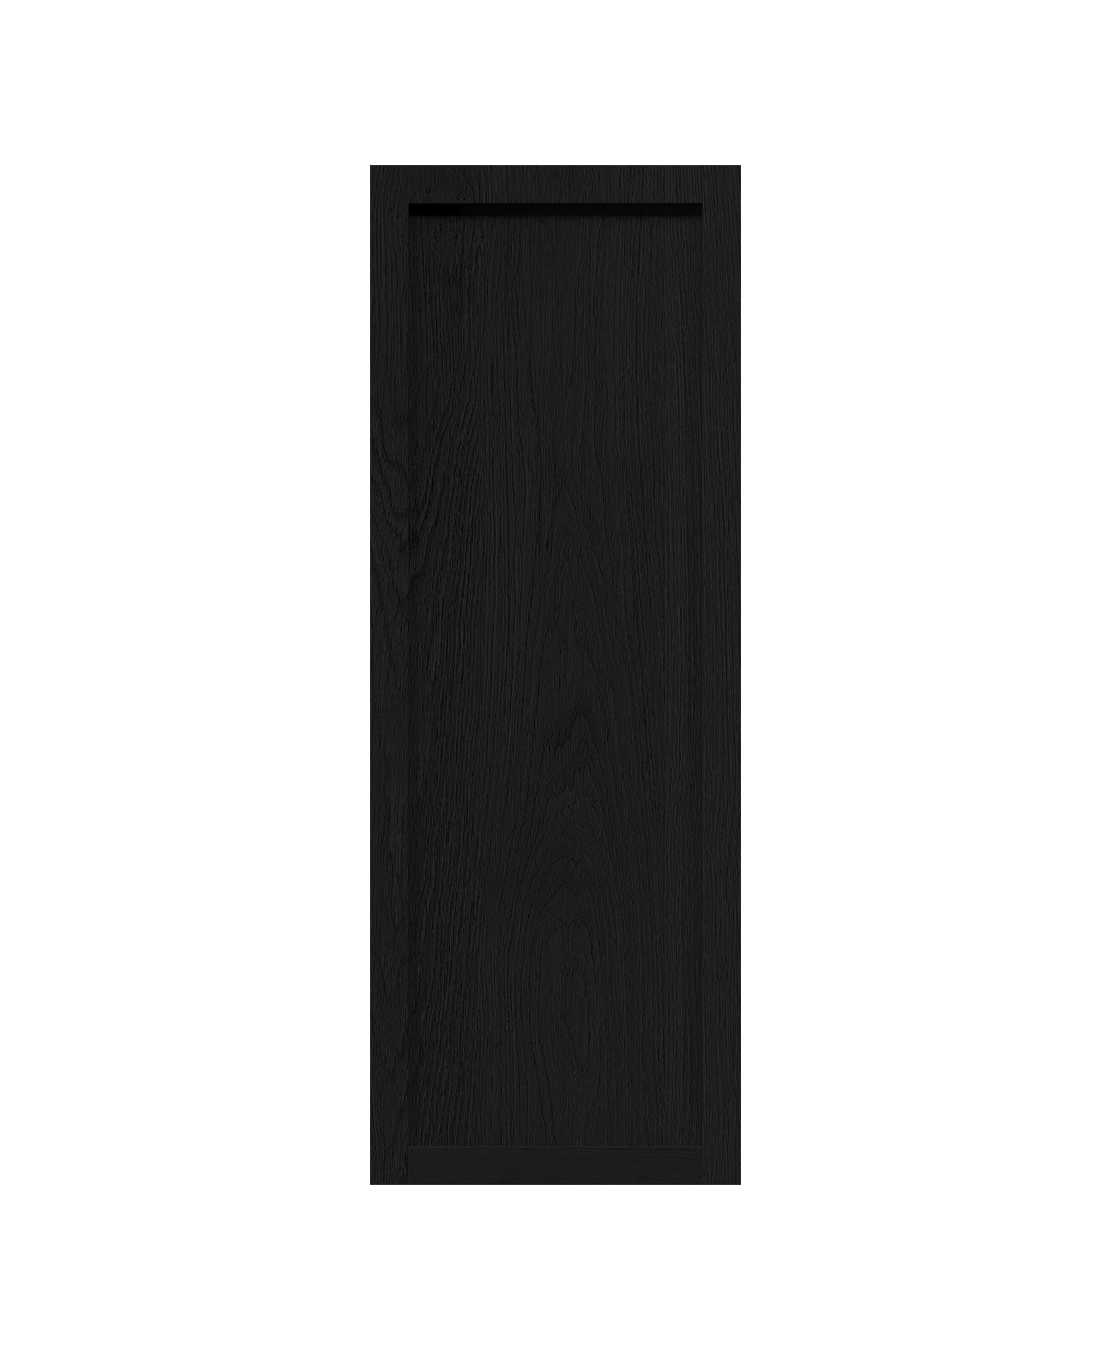 Coquo modular open upper cabinet in black stained oak with two wood shelves.